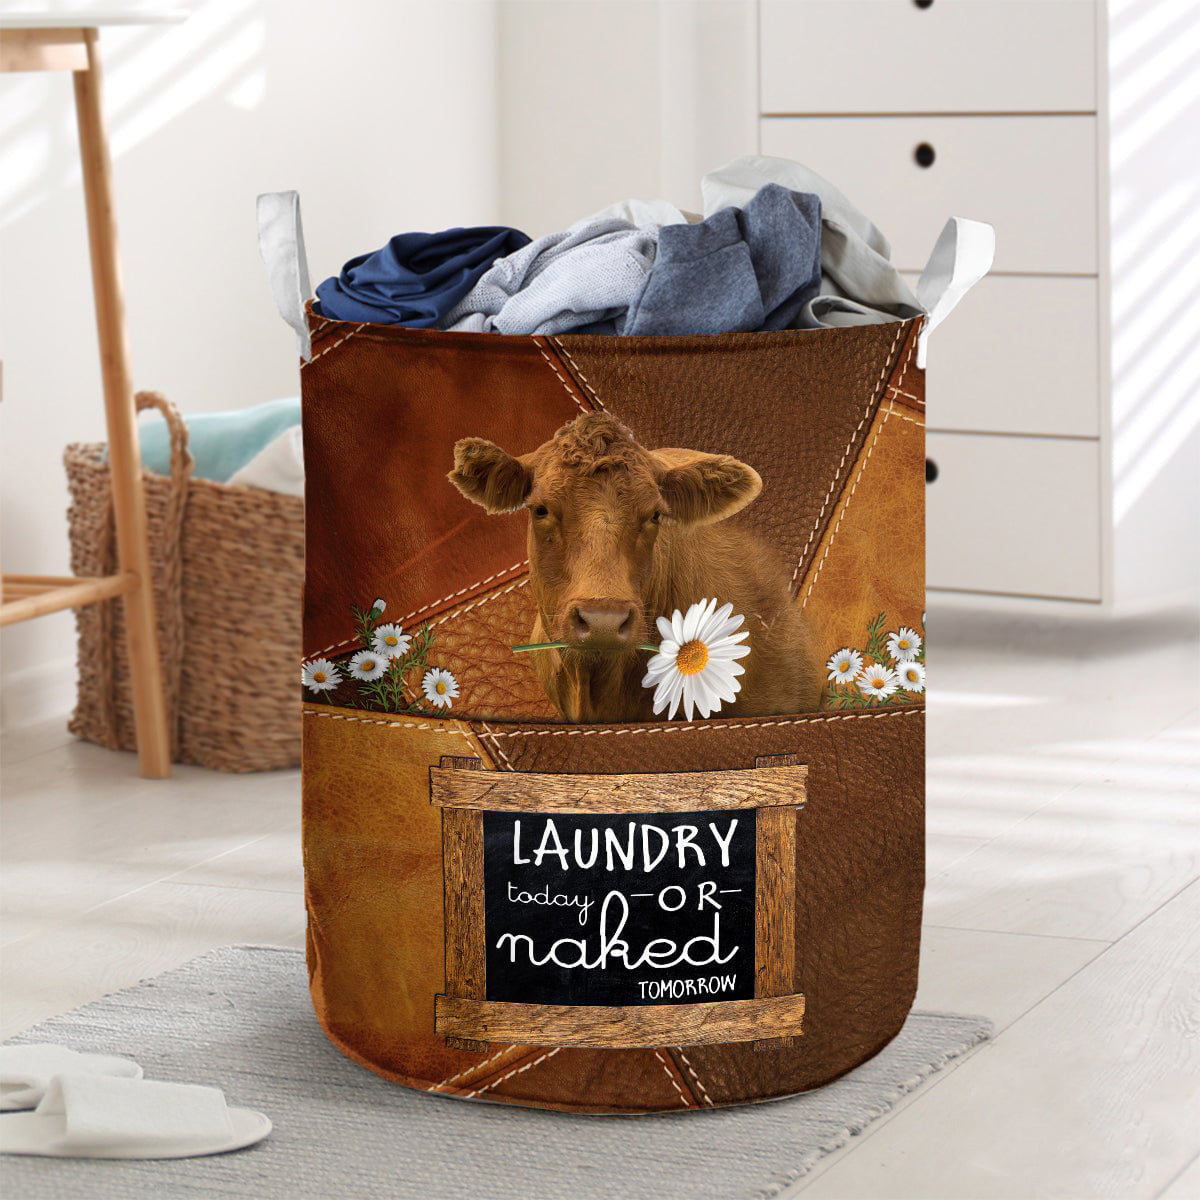 South devon cattle-laundry today or naked tomorrow laundry basket